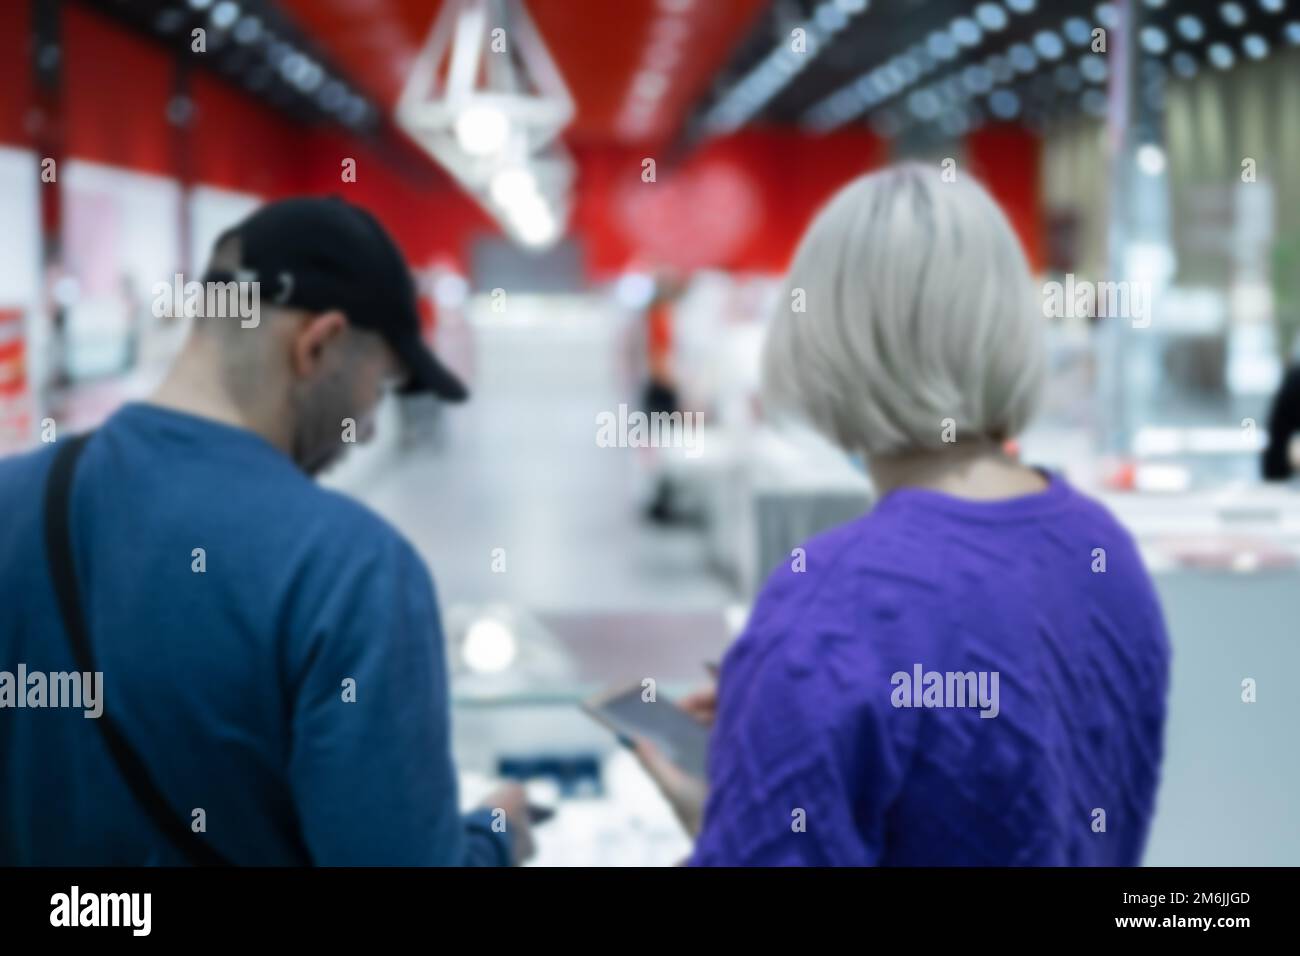 A man and a woman choose something in a jewelry store with a red and white interior. Defocused photo Stock Photo